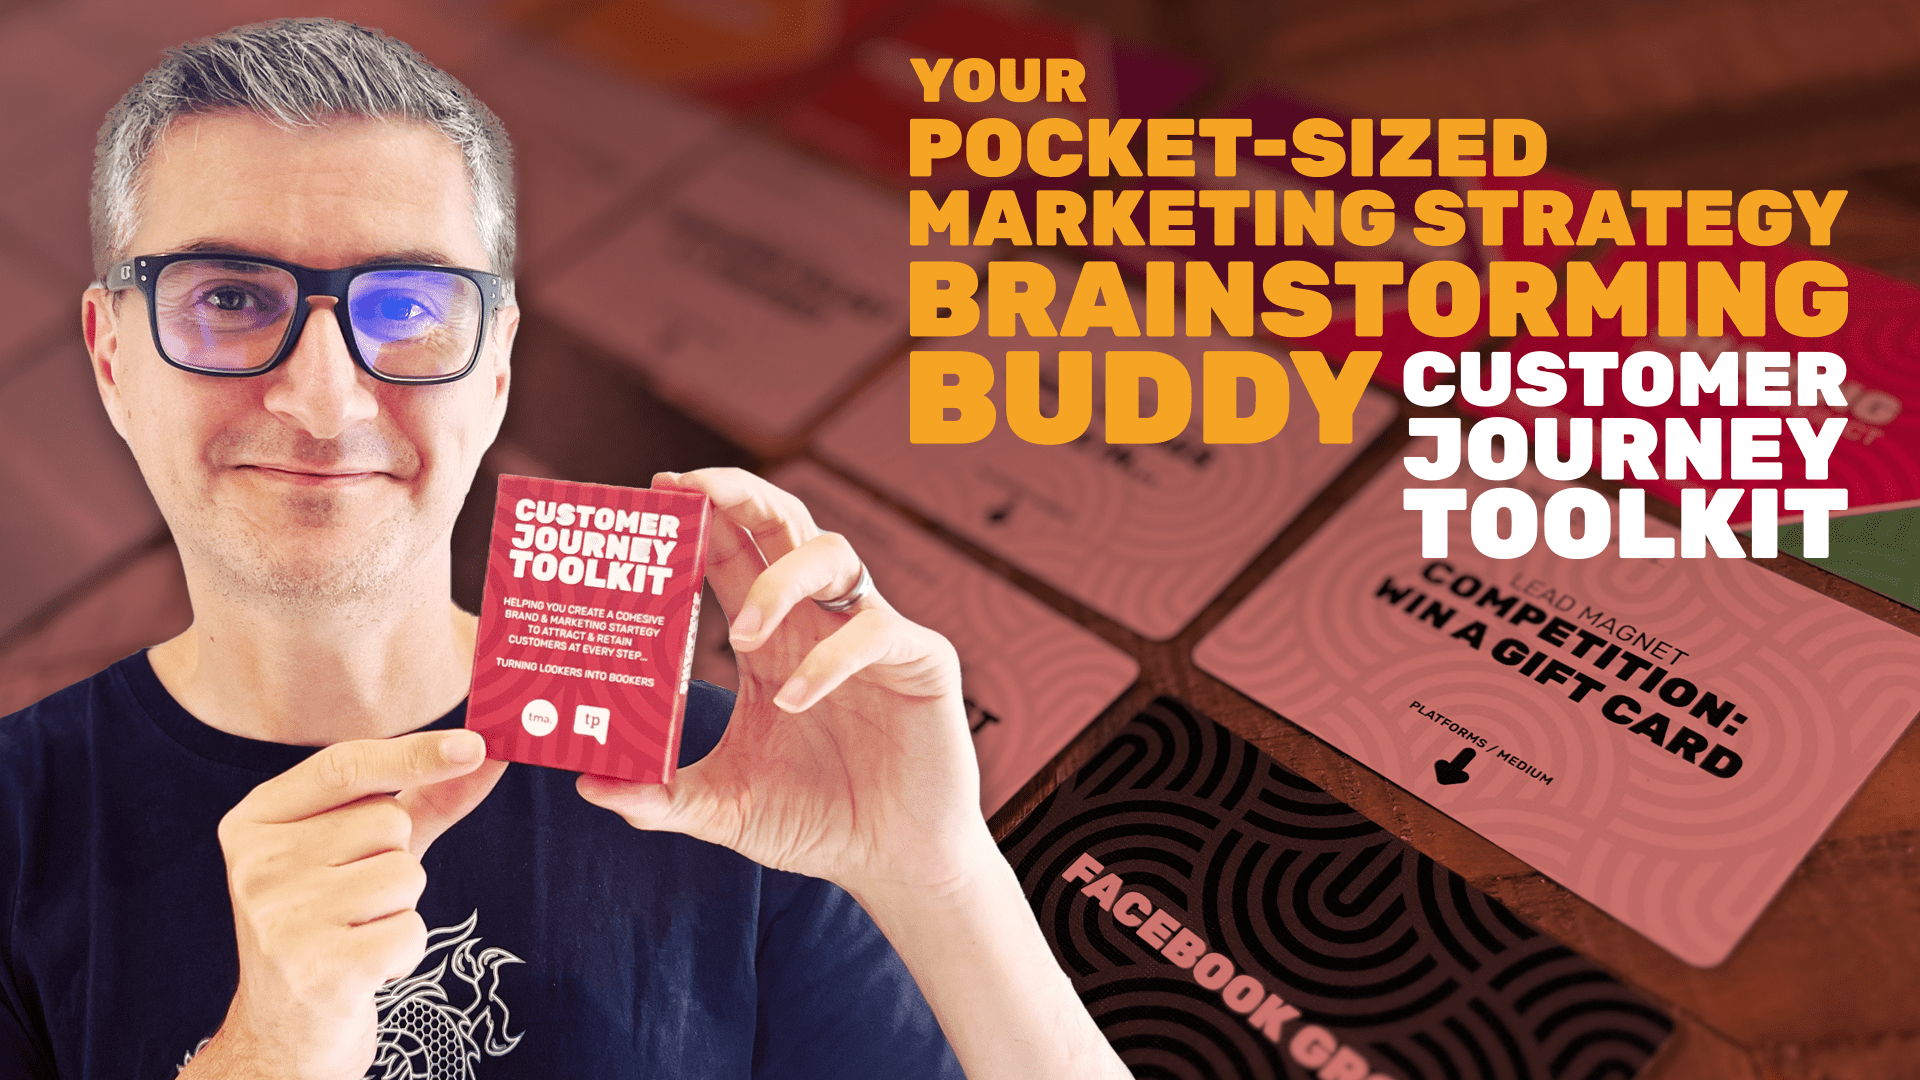 The Customer Journey Toolkit: Your Pocket-sized Marketing Strategy Brainstorming Buddy